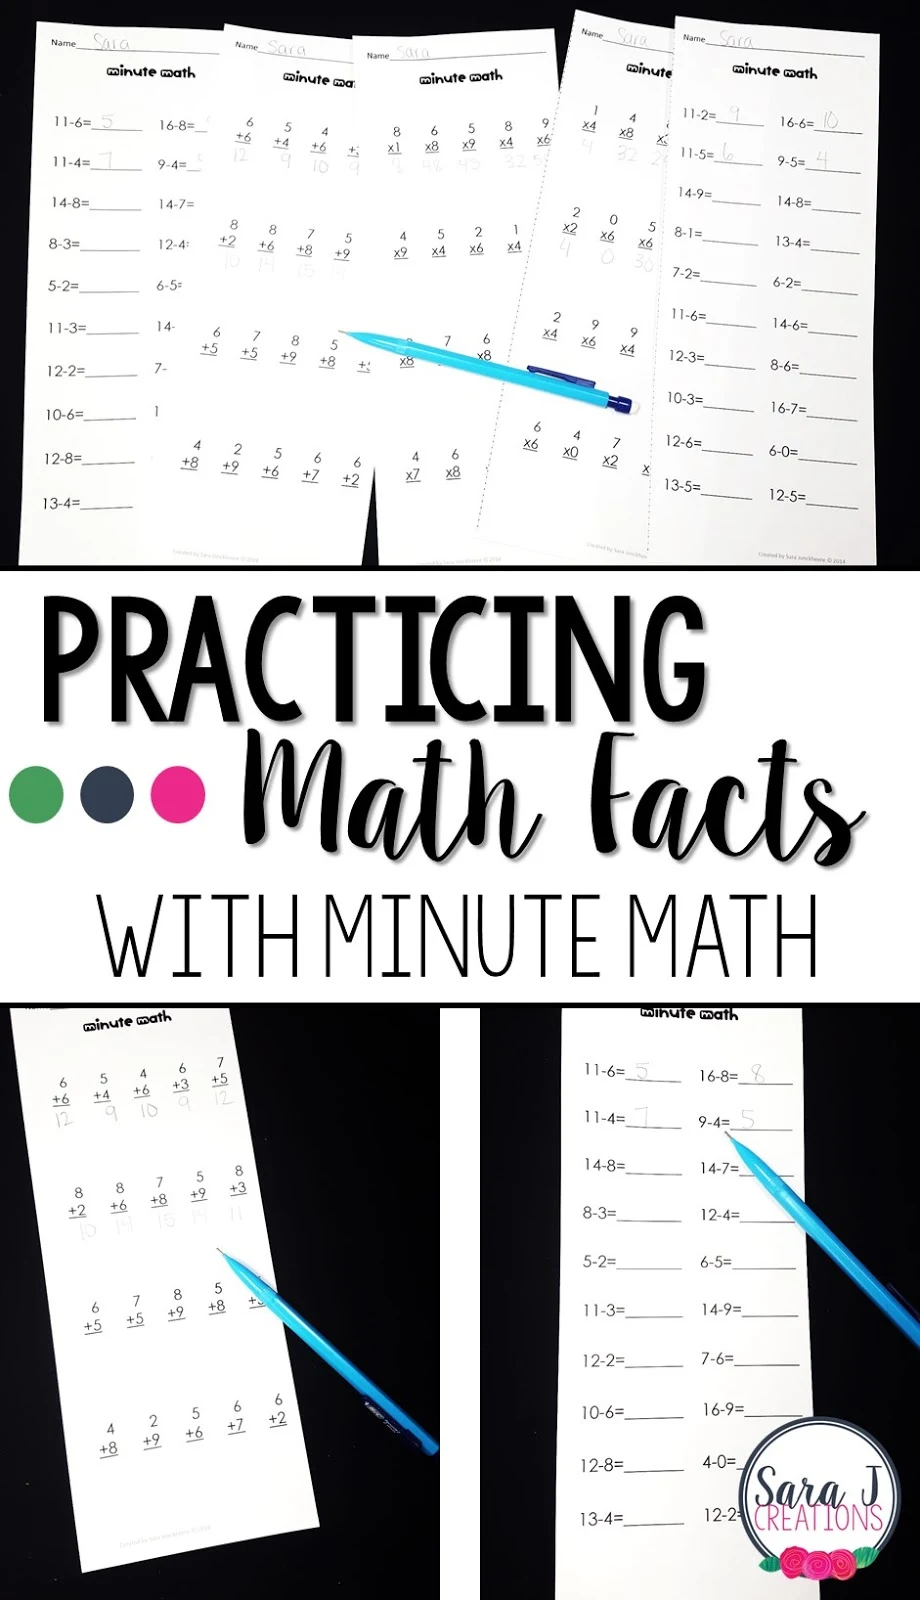 Games, printables and teaching ideas to make math fact practice and developing fluency more fun.